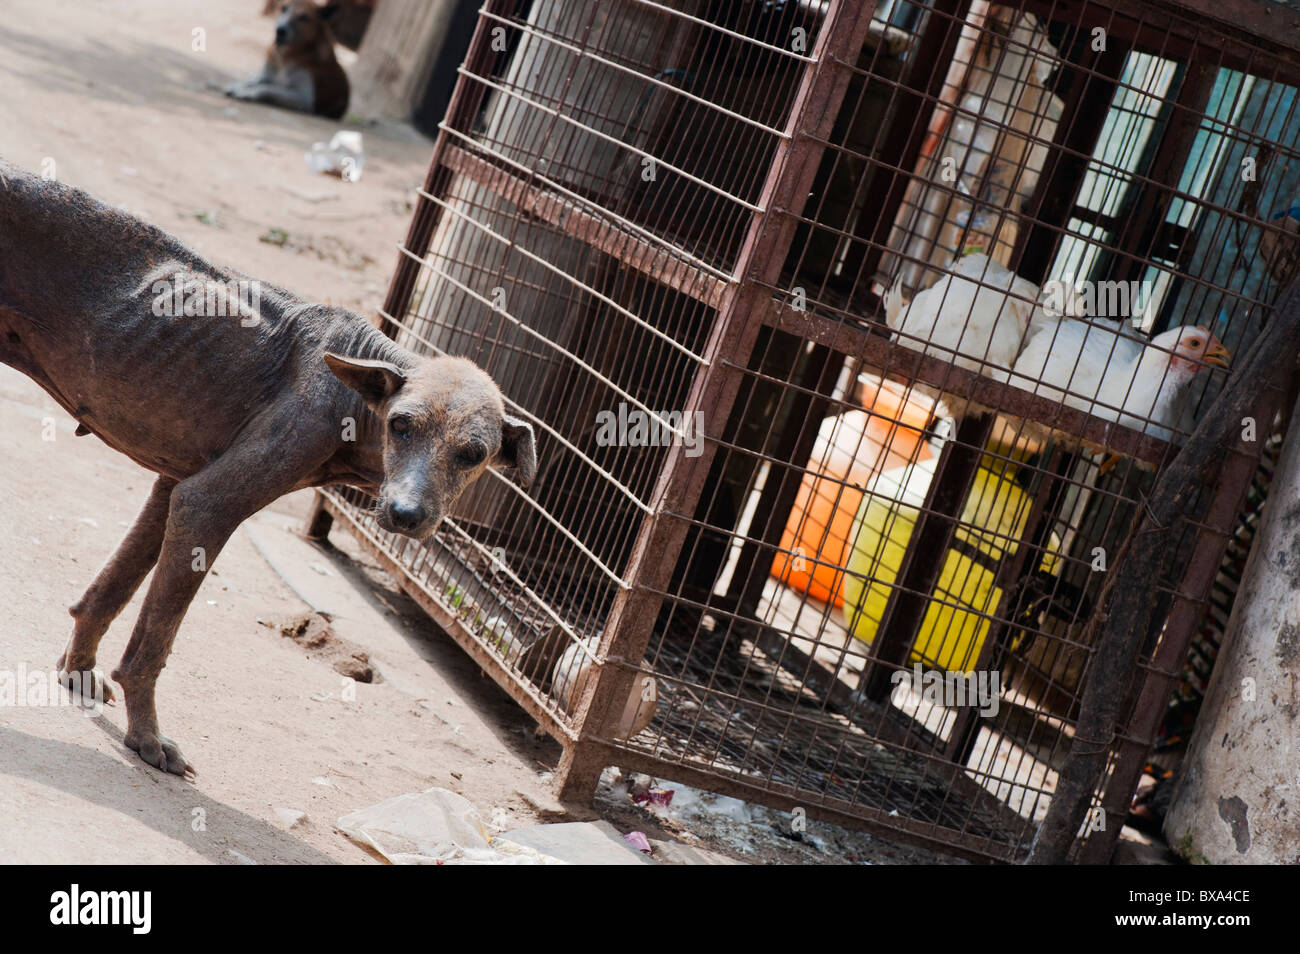 Thin mange riddled hungry stray dog standing next to chickens in a cage. Andhra Pradesh, India Stock Photo